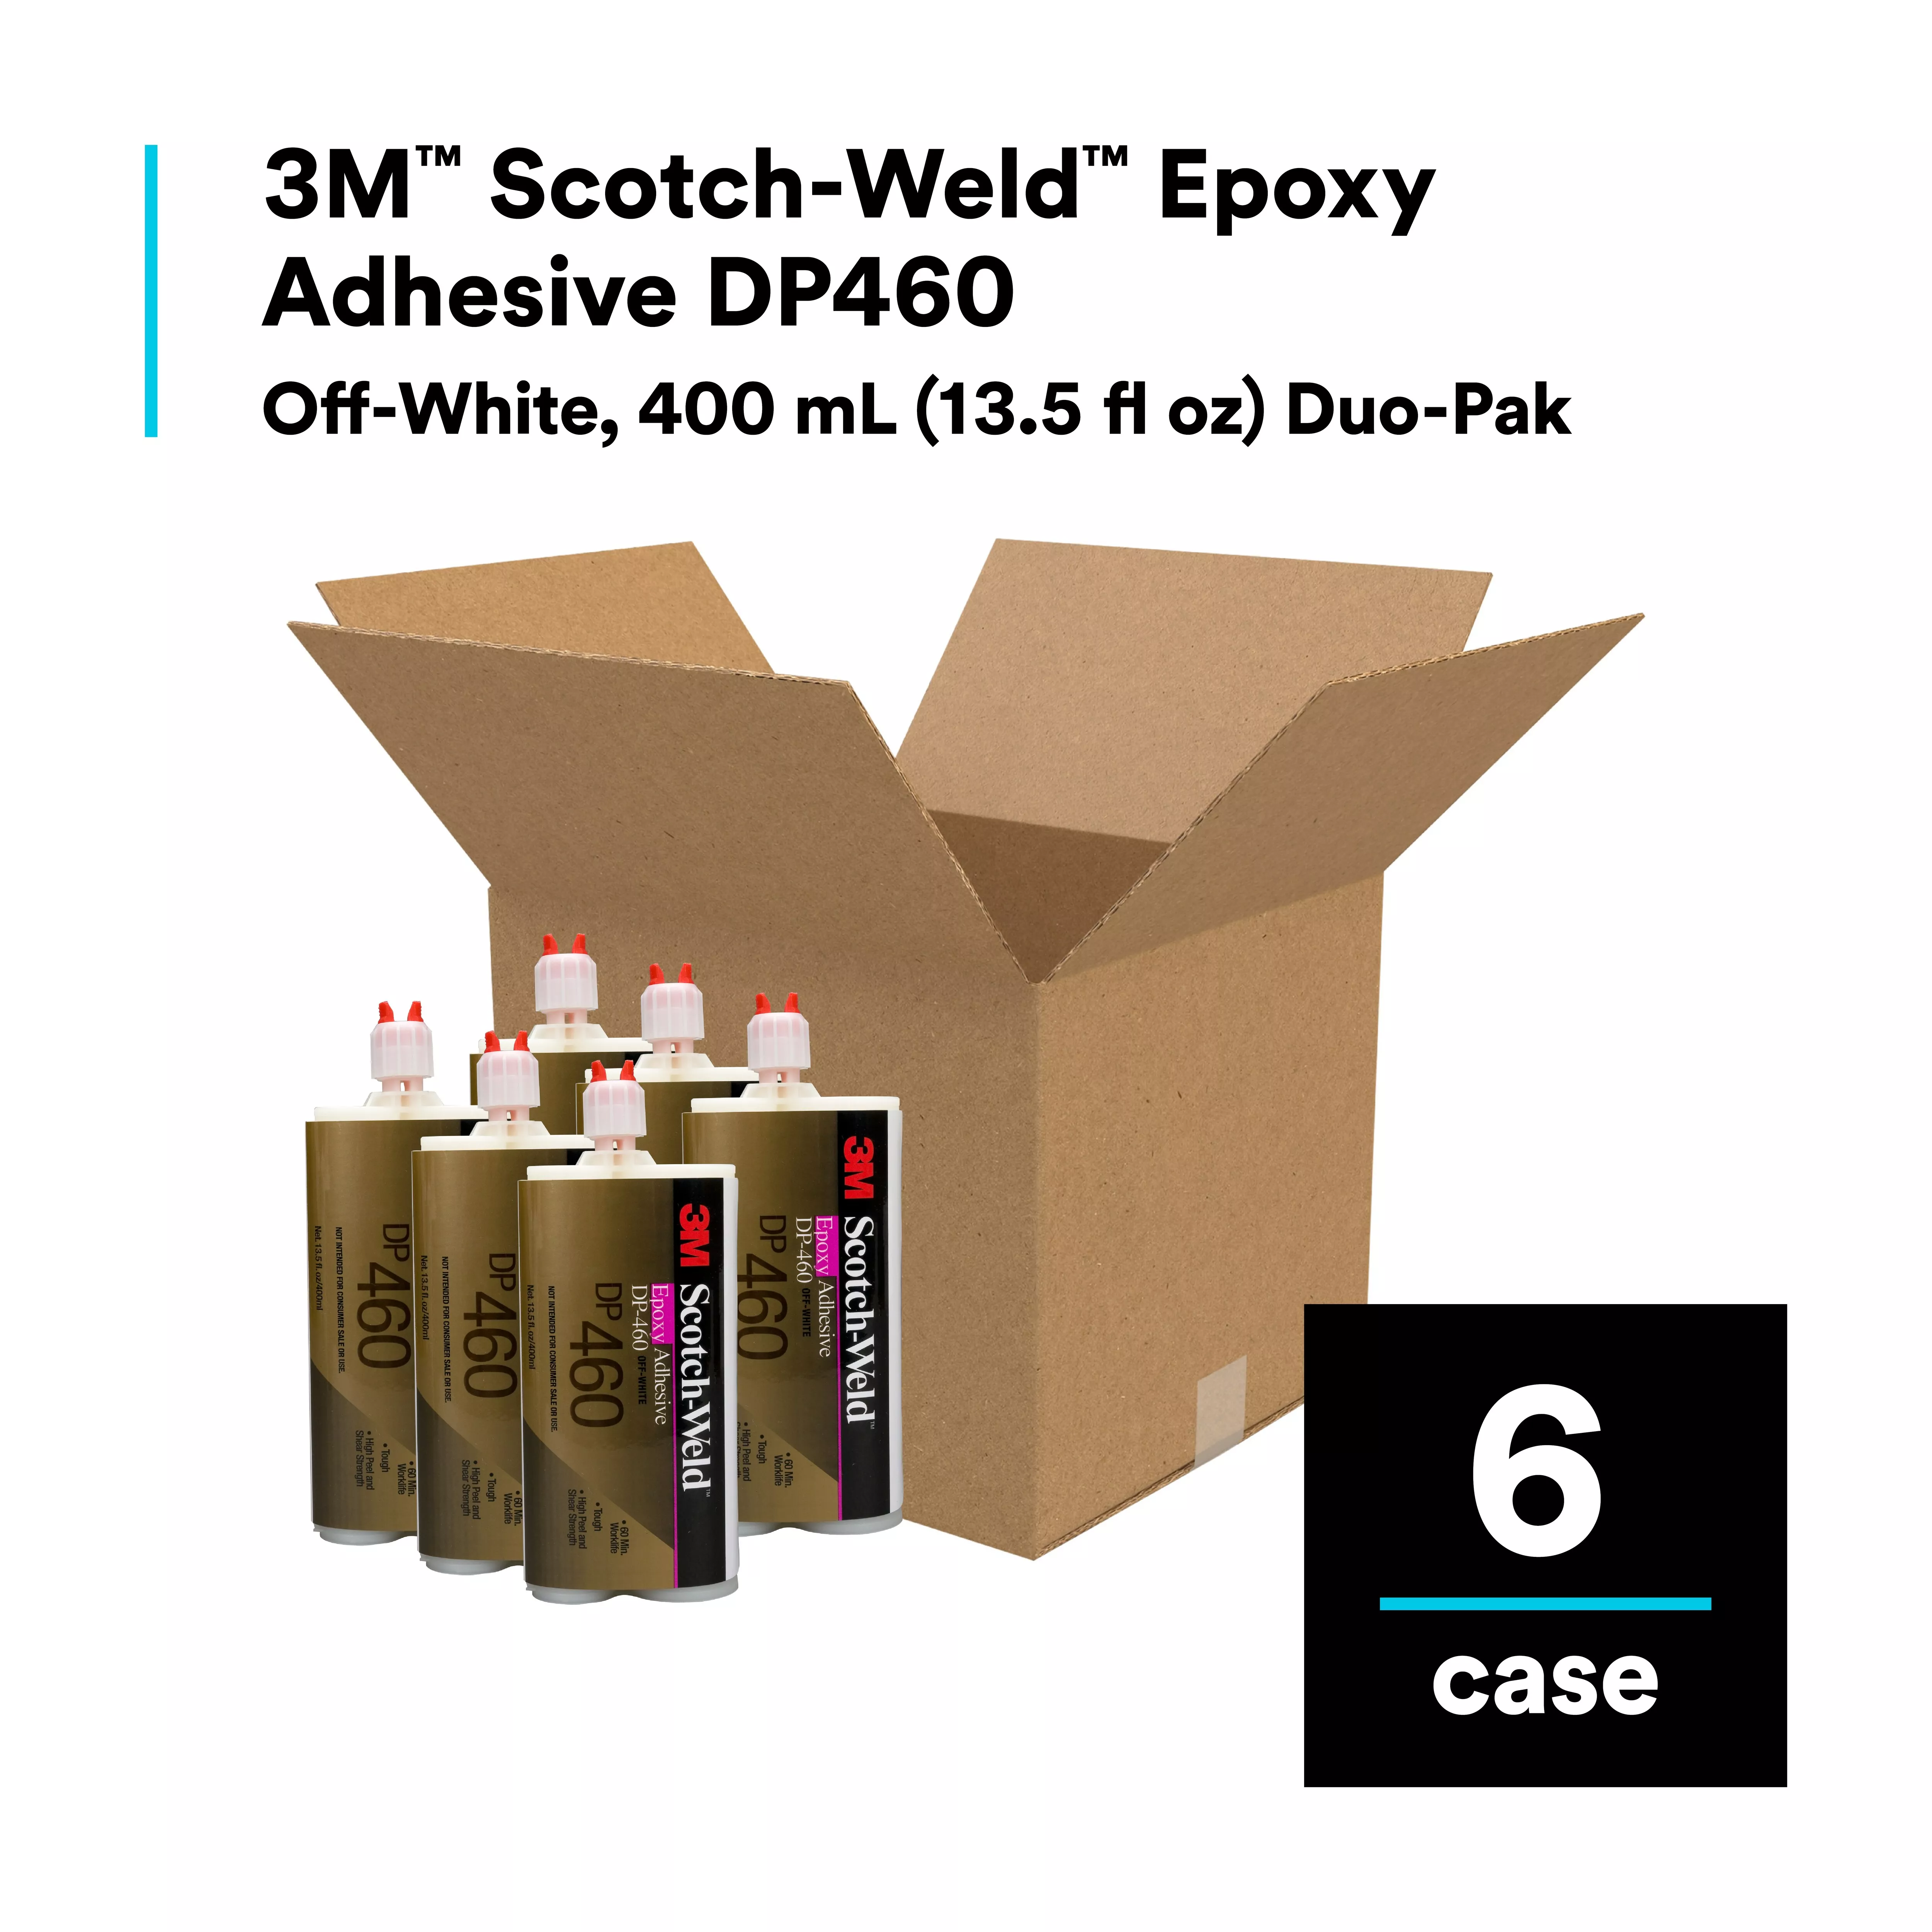 Product Number DP460 | 3M™ Scotch-Weld™ Epoxy Adhesive DP460